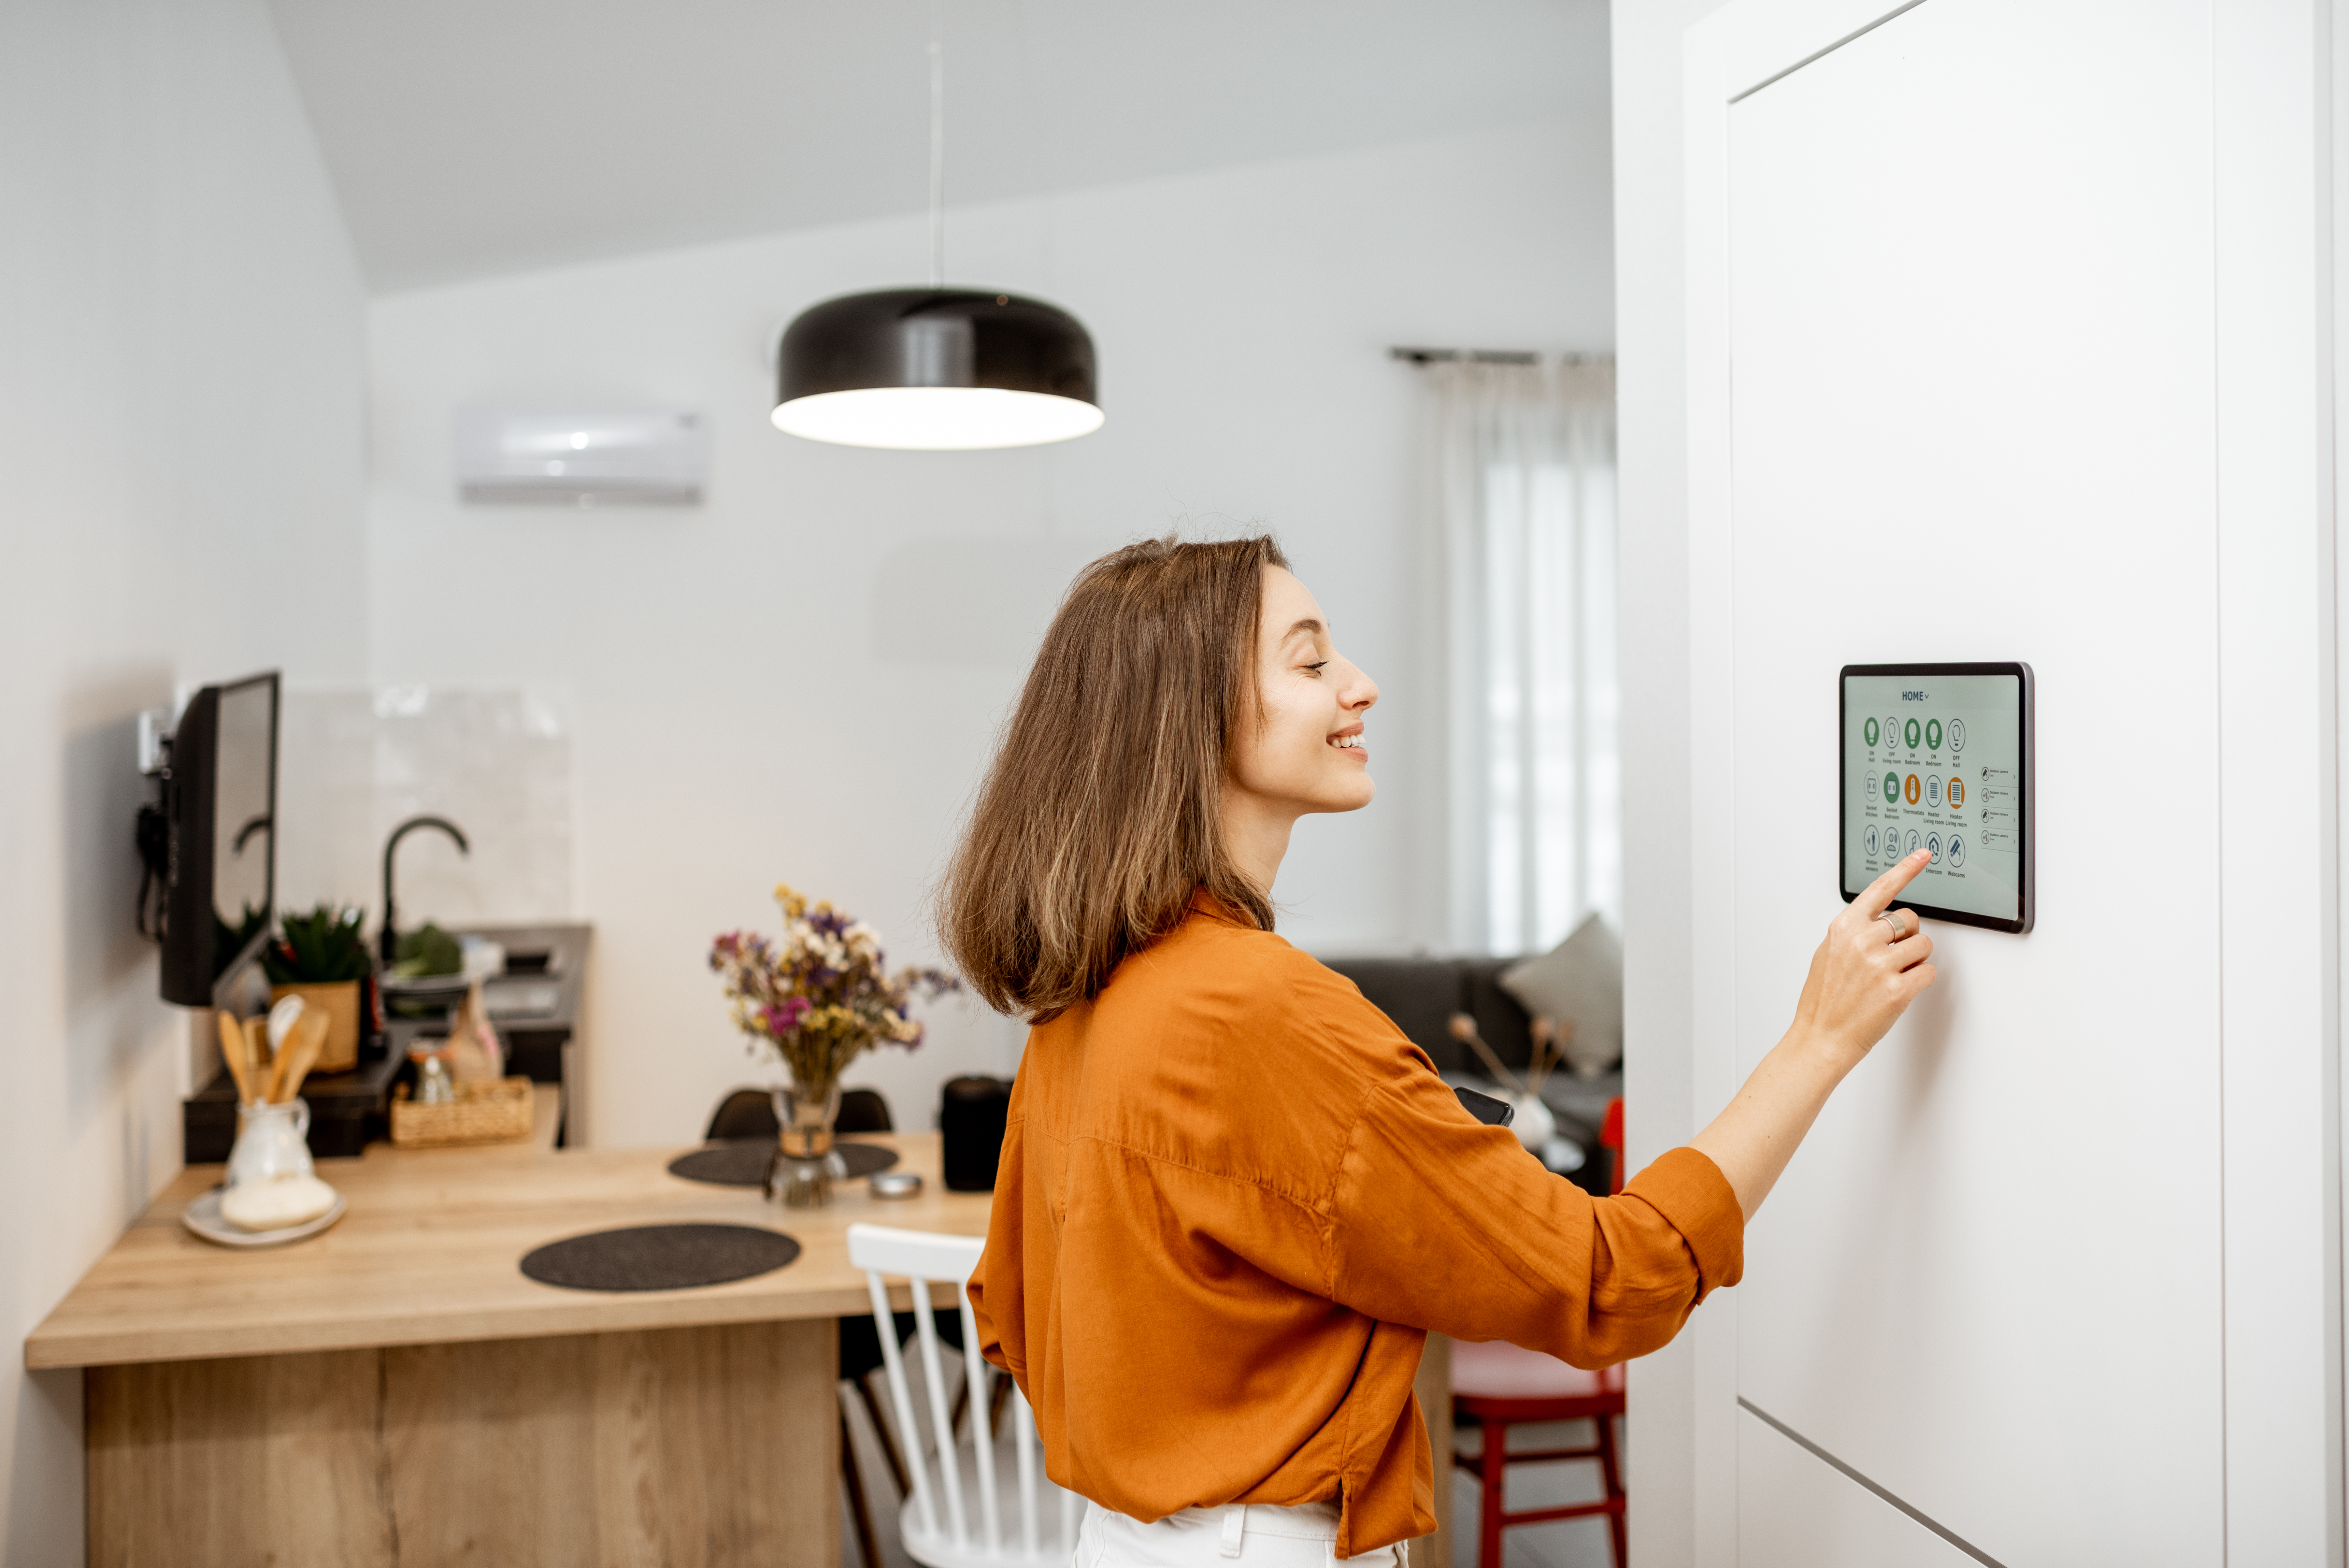 The 5 best home tech gadgets to help save you money